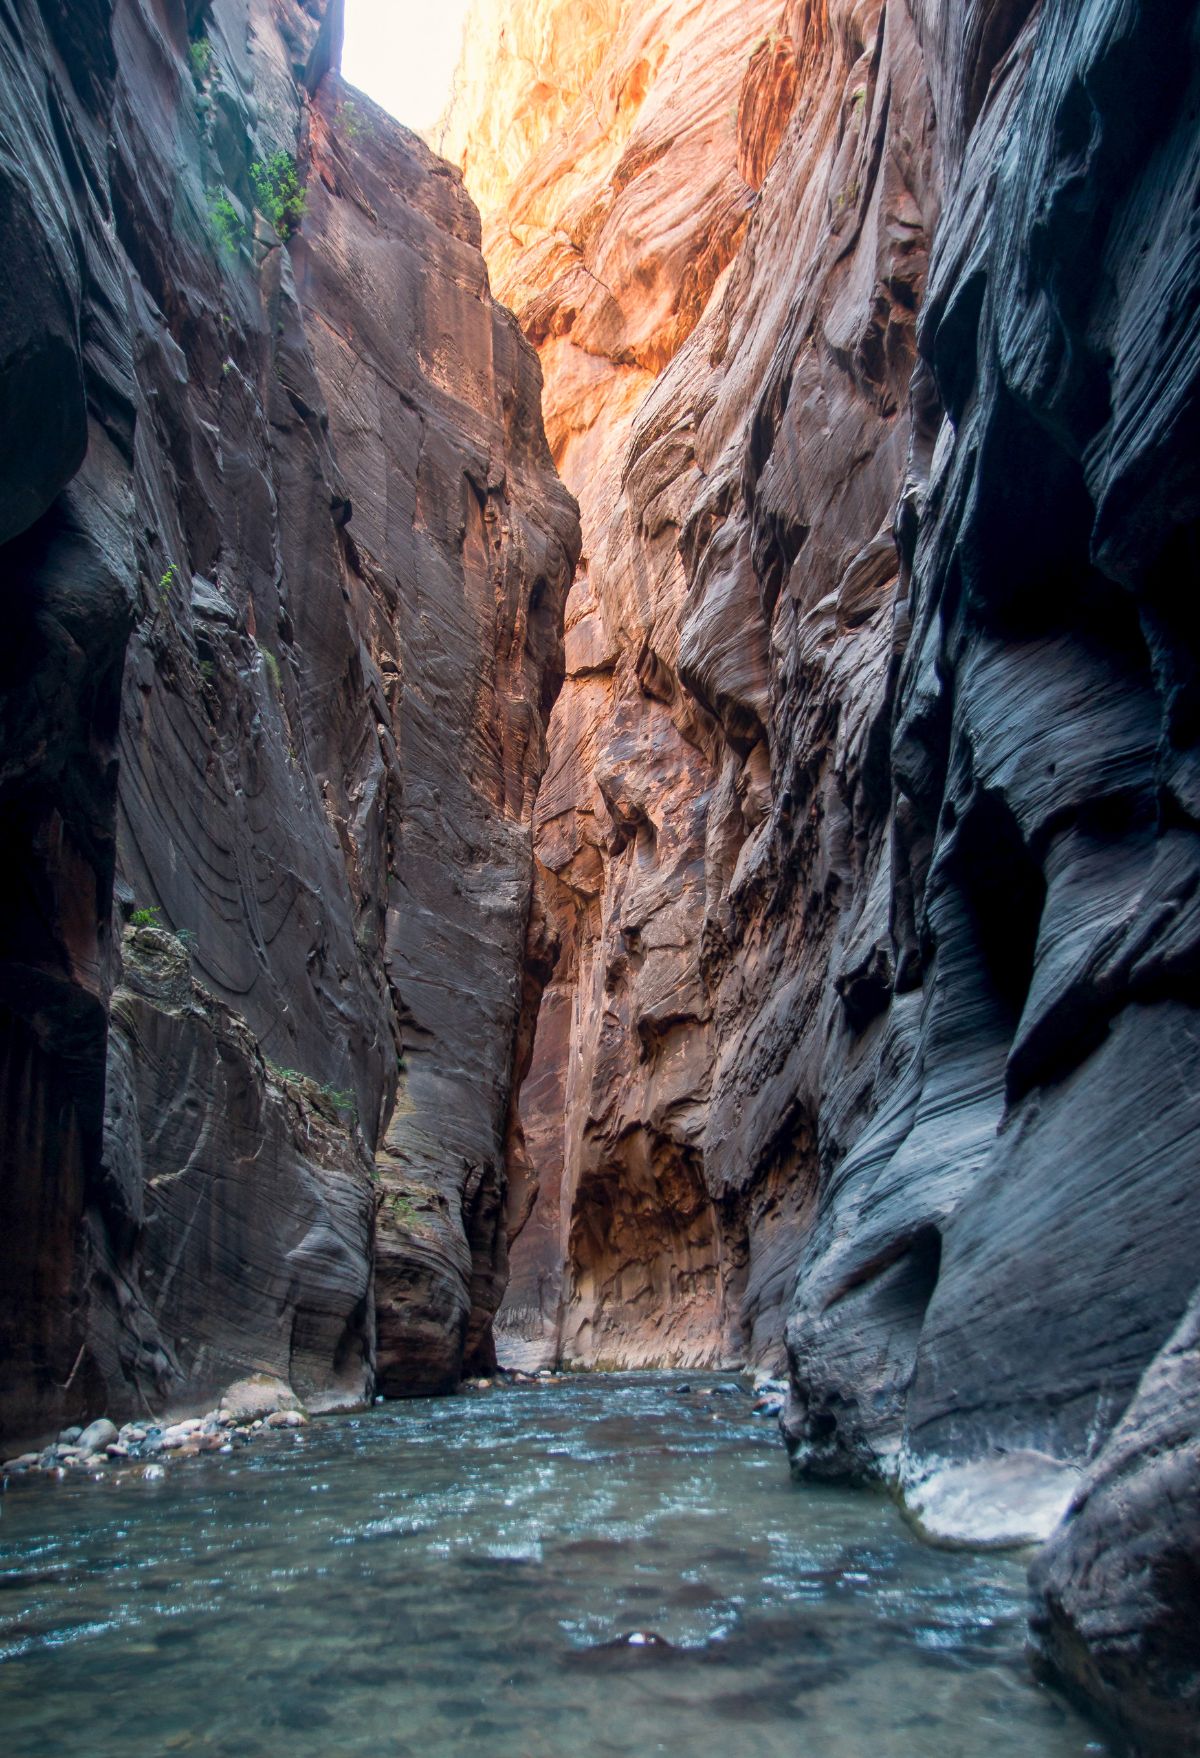 Zion National Park, Utah, with its stunning narrows, offers an unforgettable itinerary.